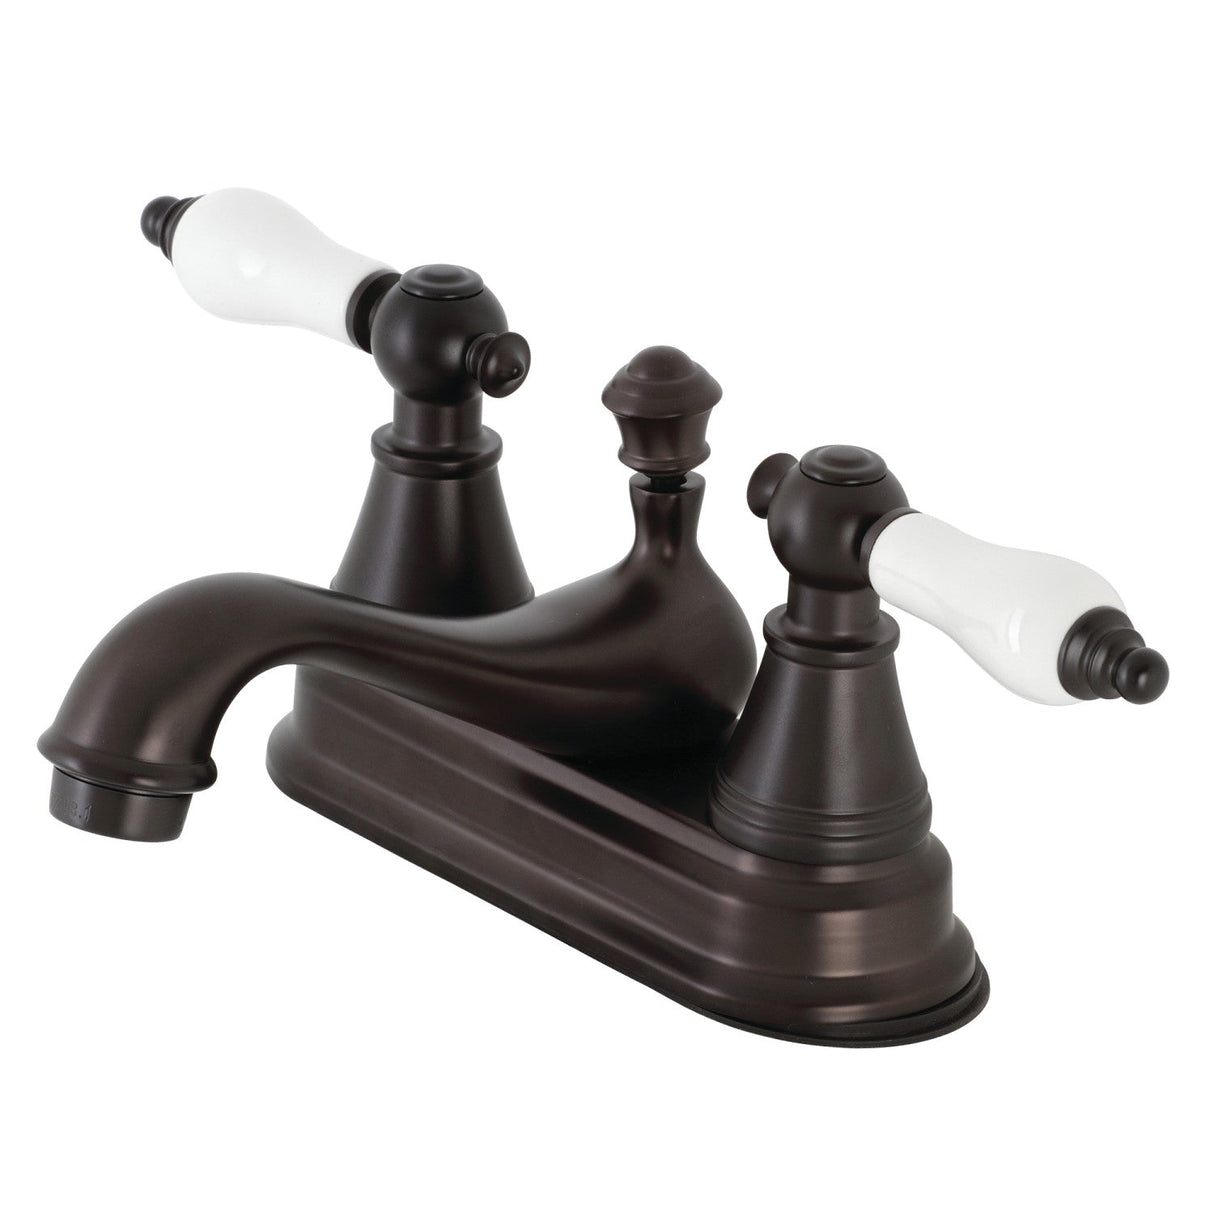 English Classic FSY3605PL Two-Handle 3-Hole Deck Mount 4" Centerset Bathroom Faucet with Plastic Pop-Up, Oil Rubbed Bronze